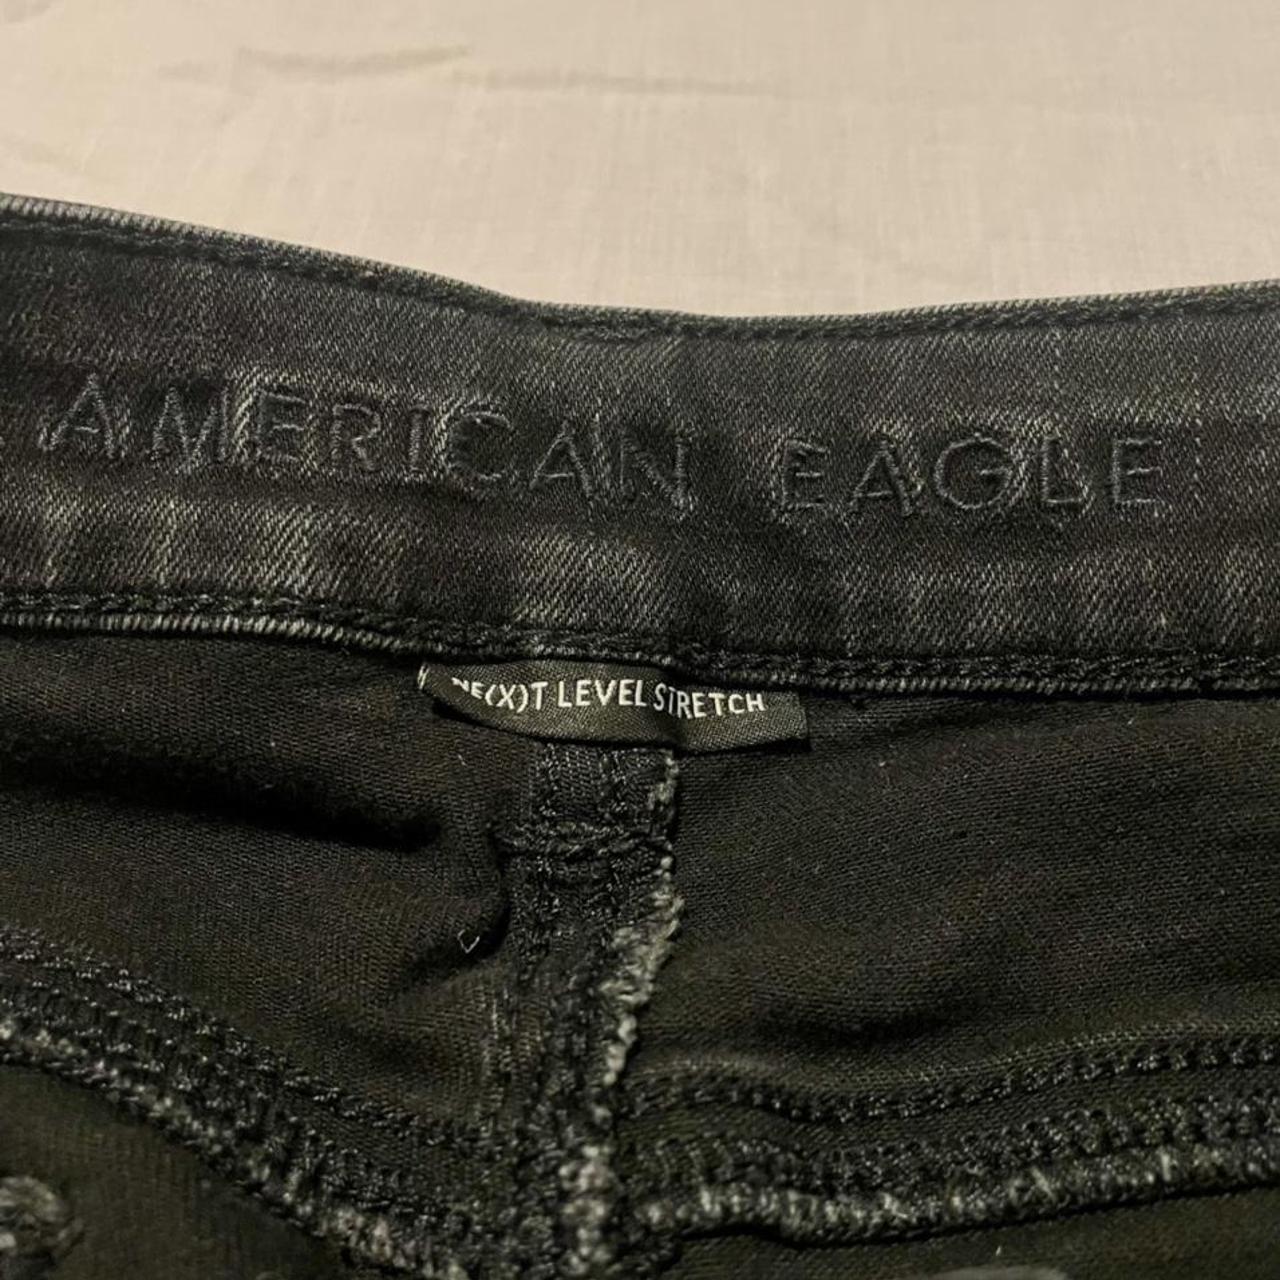 Product Image 2 - ✨American Eagle Black Jeggings✨

High rise